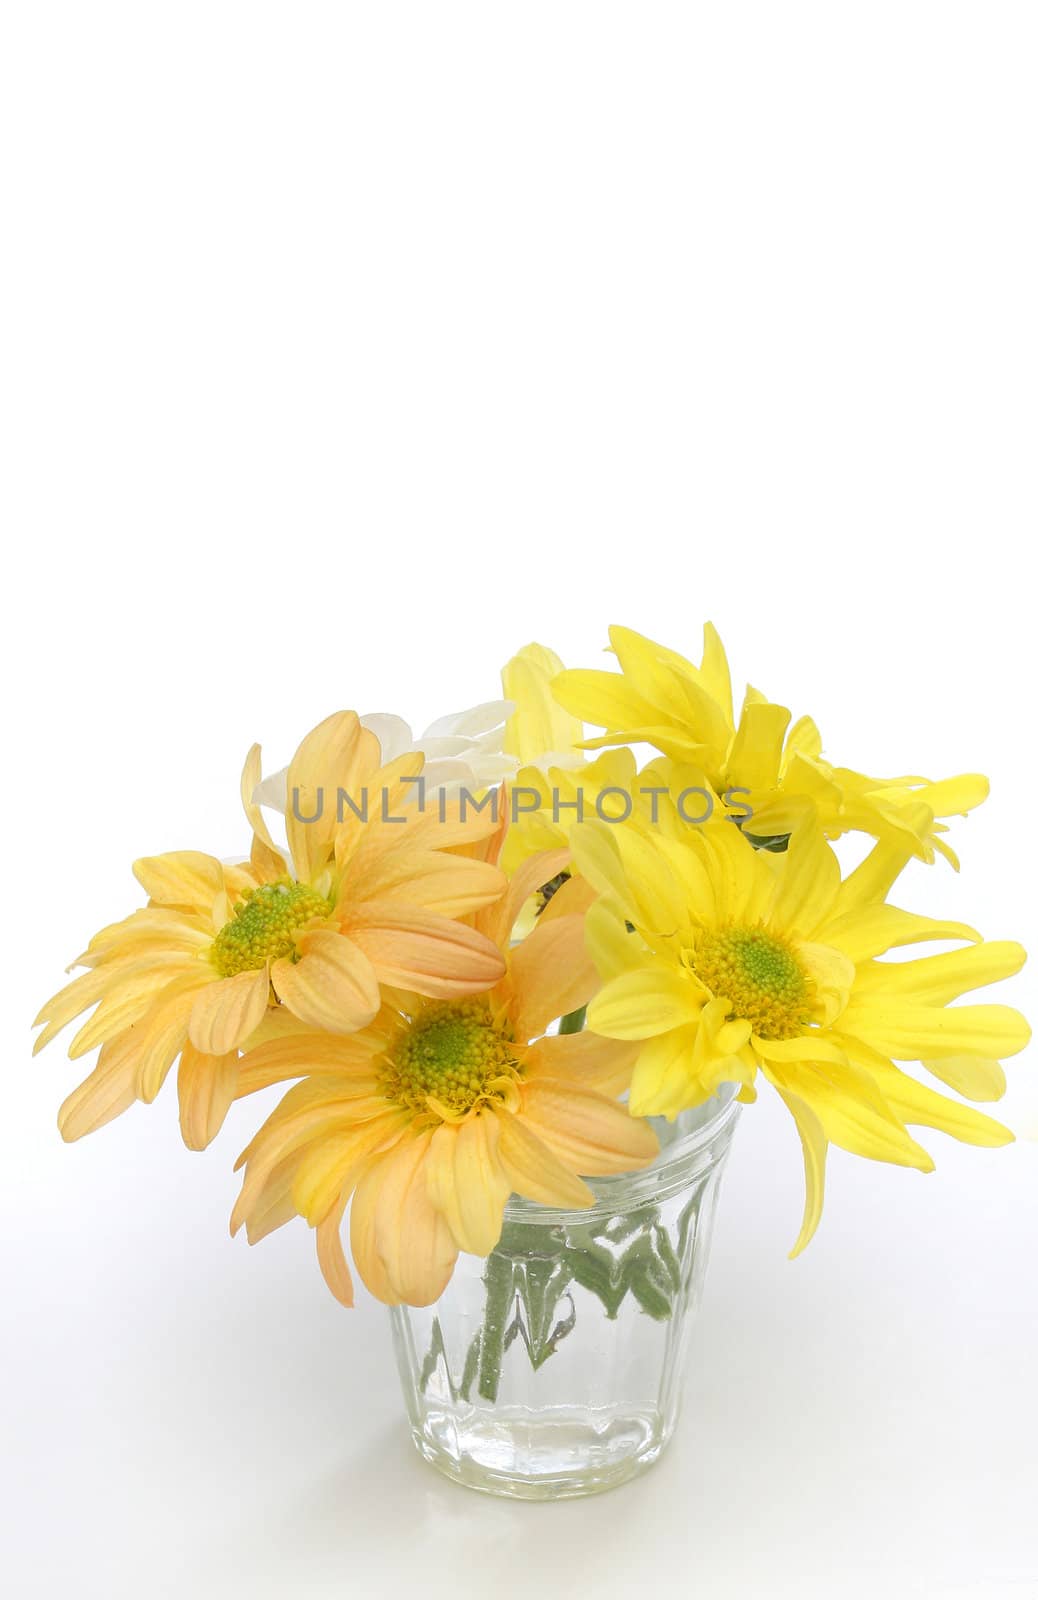 Group of flowers in a glass vase. Yellow, white and orange daisies. Useful as element design